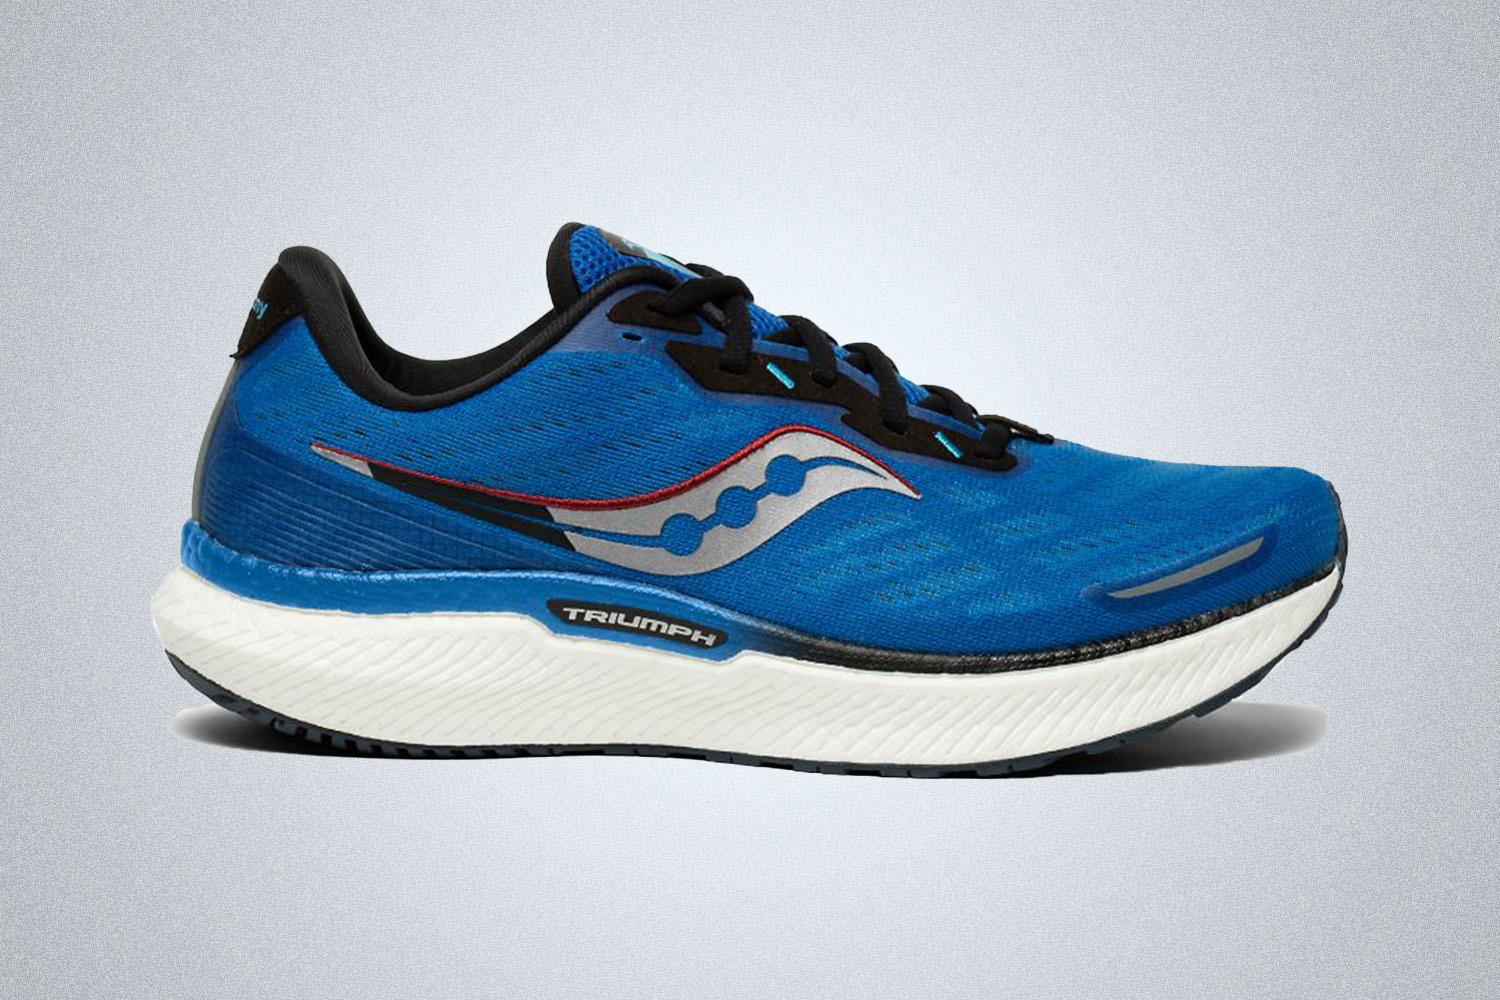 a blue and white cushioned running shoe from Saucony on a grey background